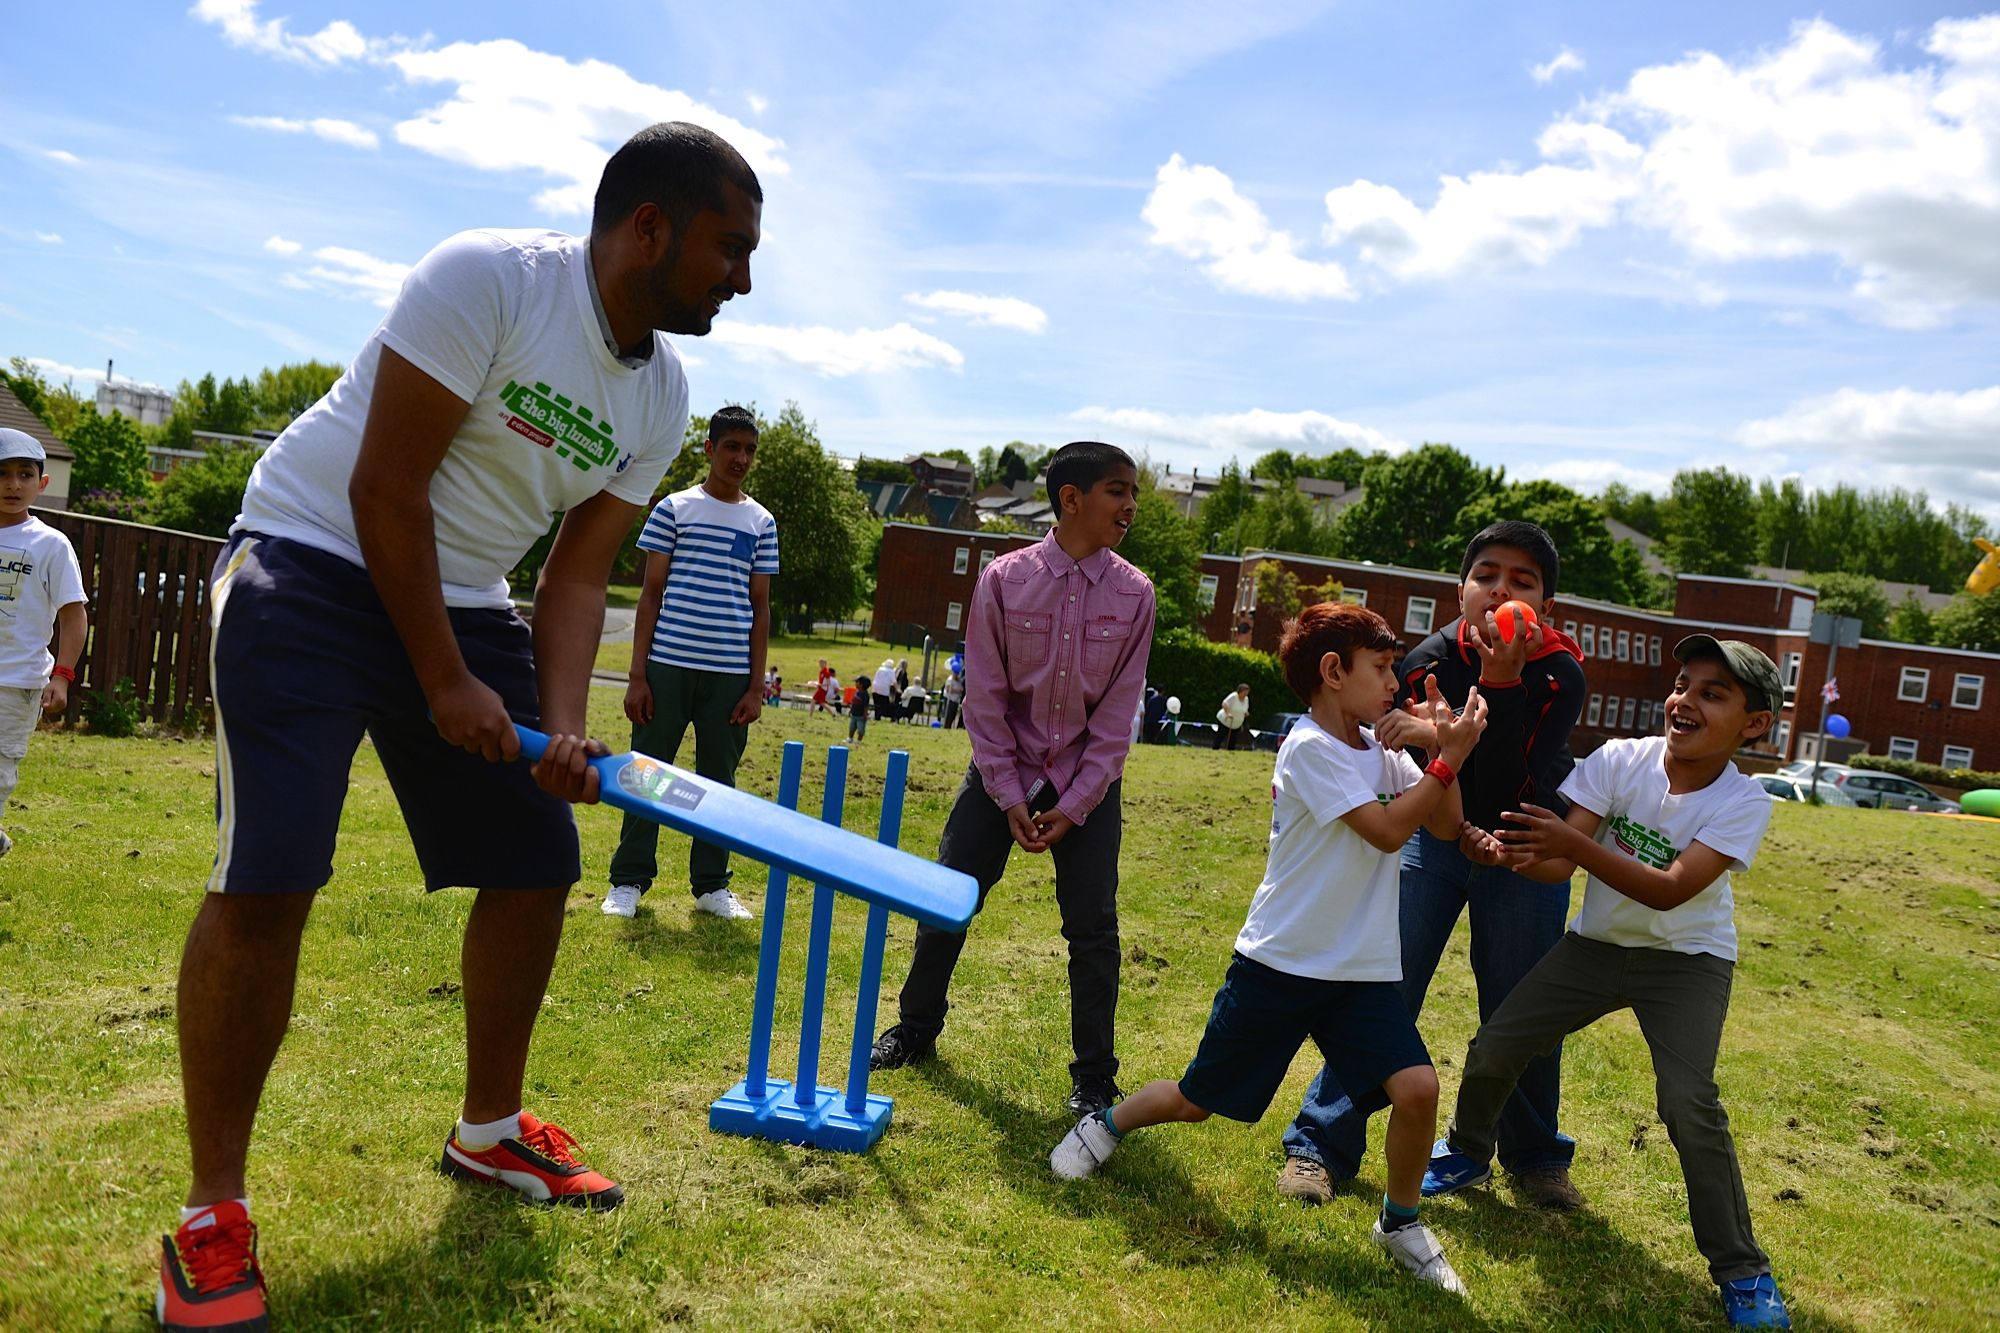 Photo of adults and children enjoying outdoor games in a community space